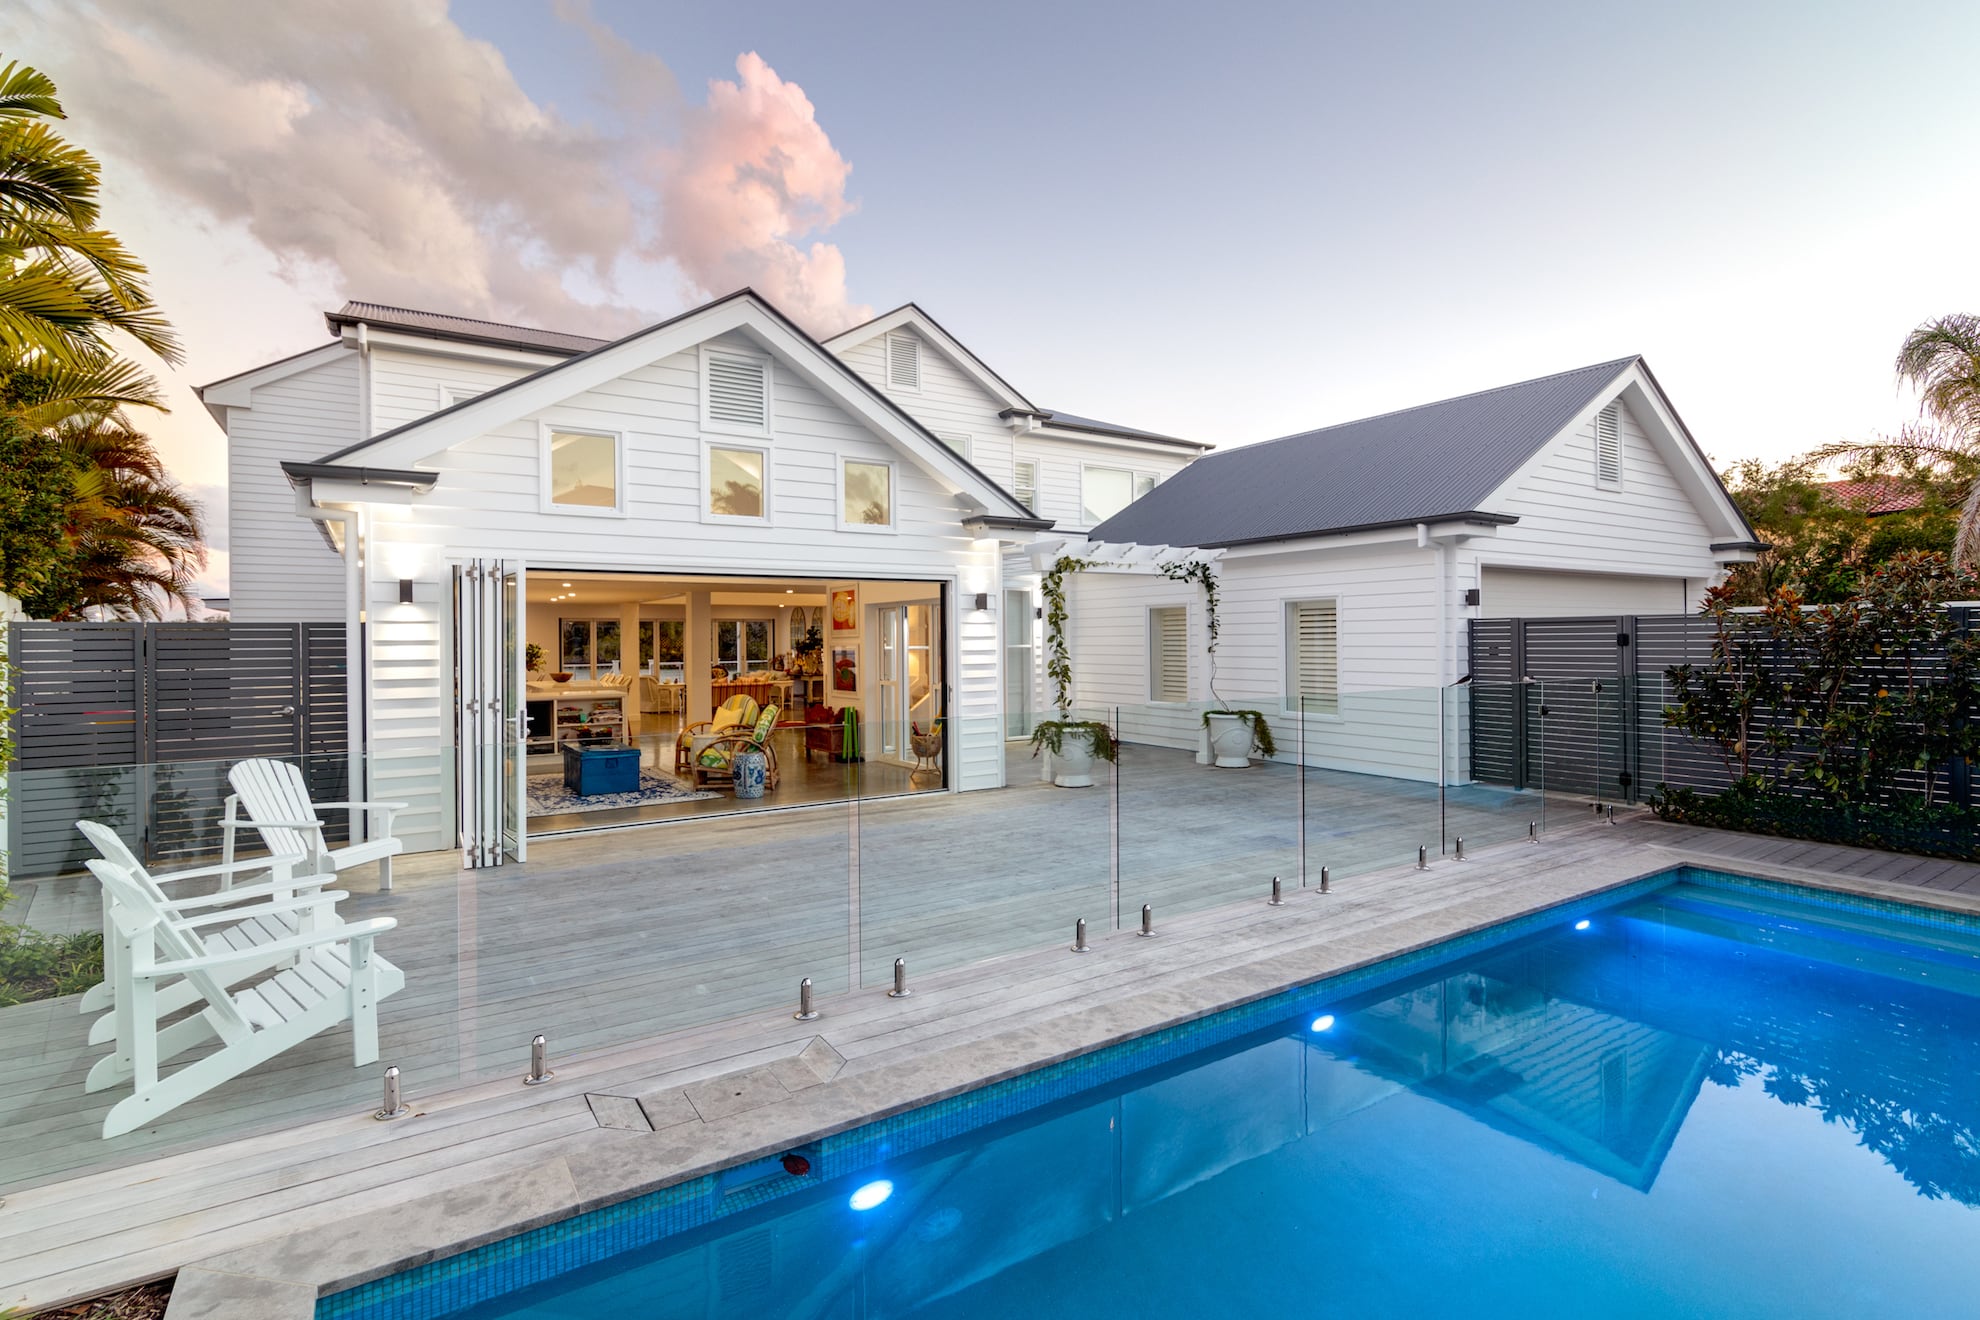 Dolphin Cres project by mdesign, a building design practice that operates on the Sunshine Coast.